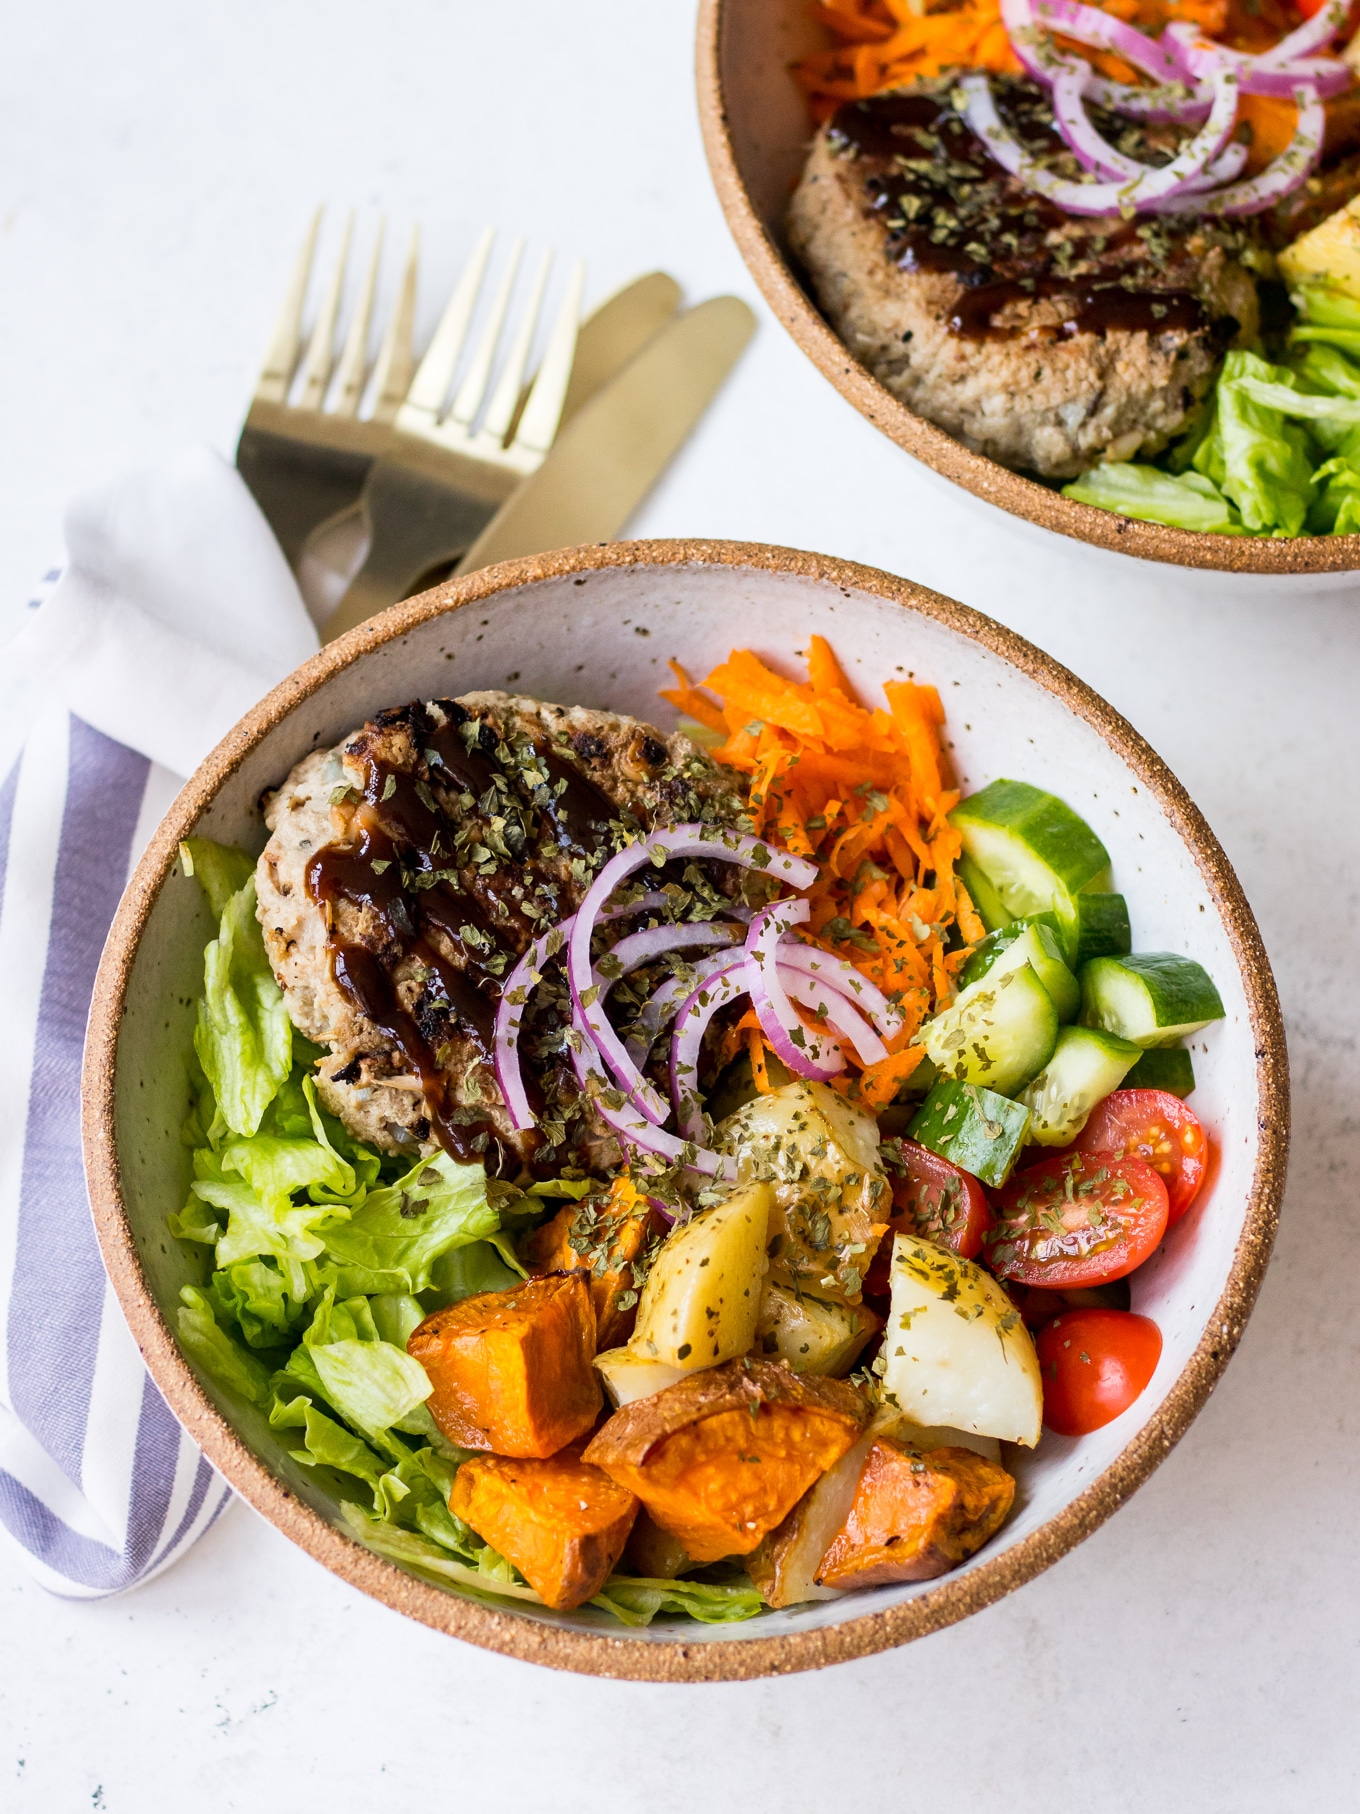 Turkey Apple and Bean Burgers with salad and bbq sauce